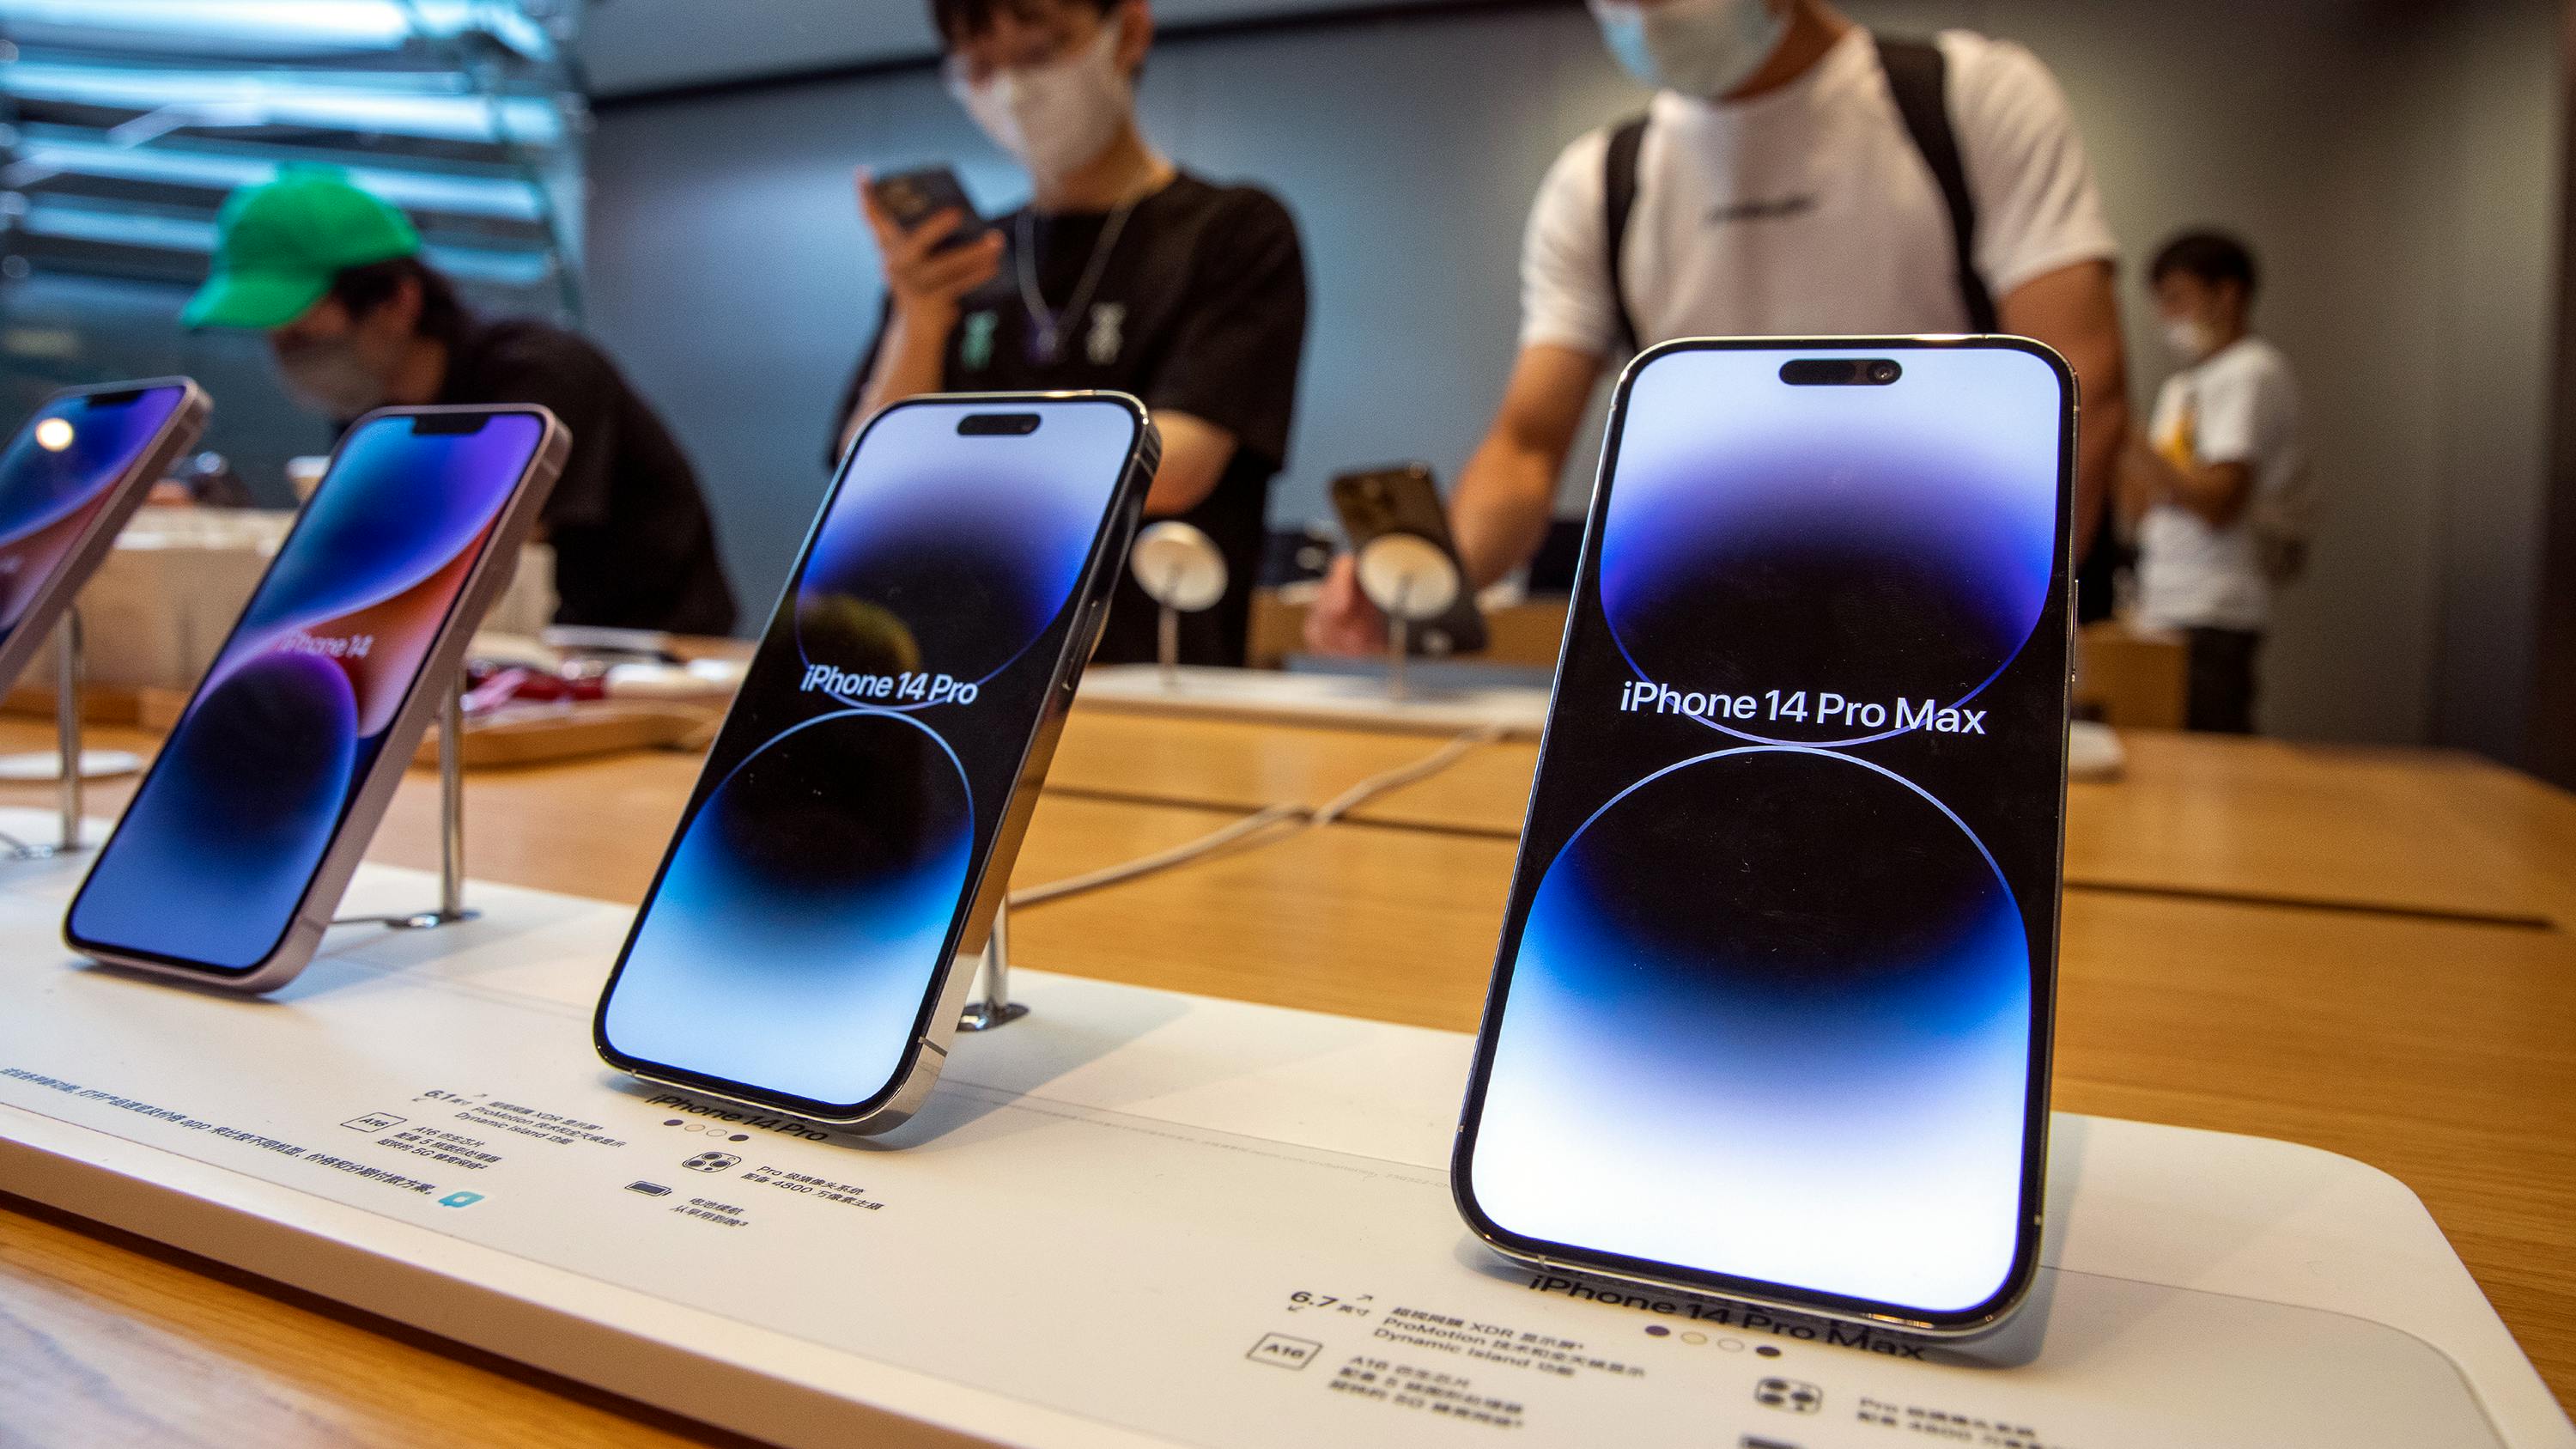 iPhone 14 Pro Max: The pros and cons of Apple's most expensive